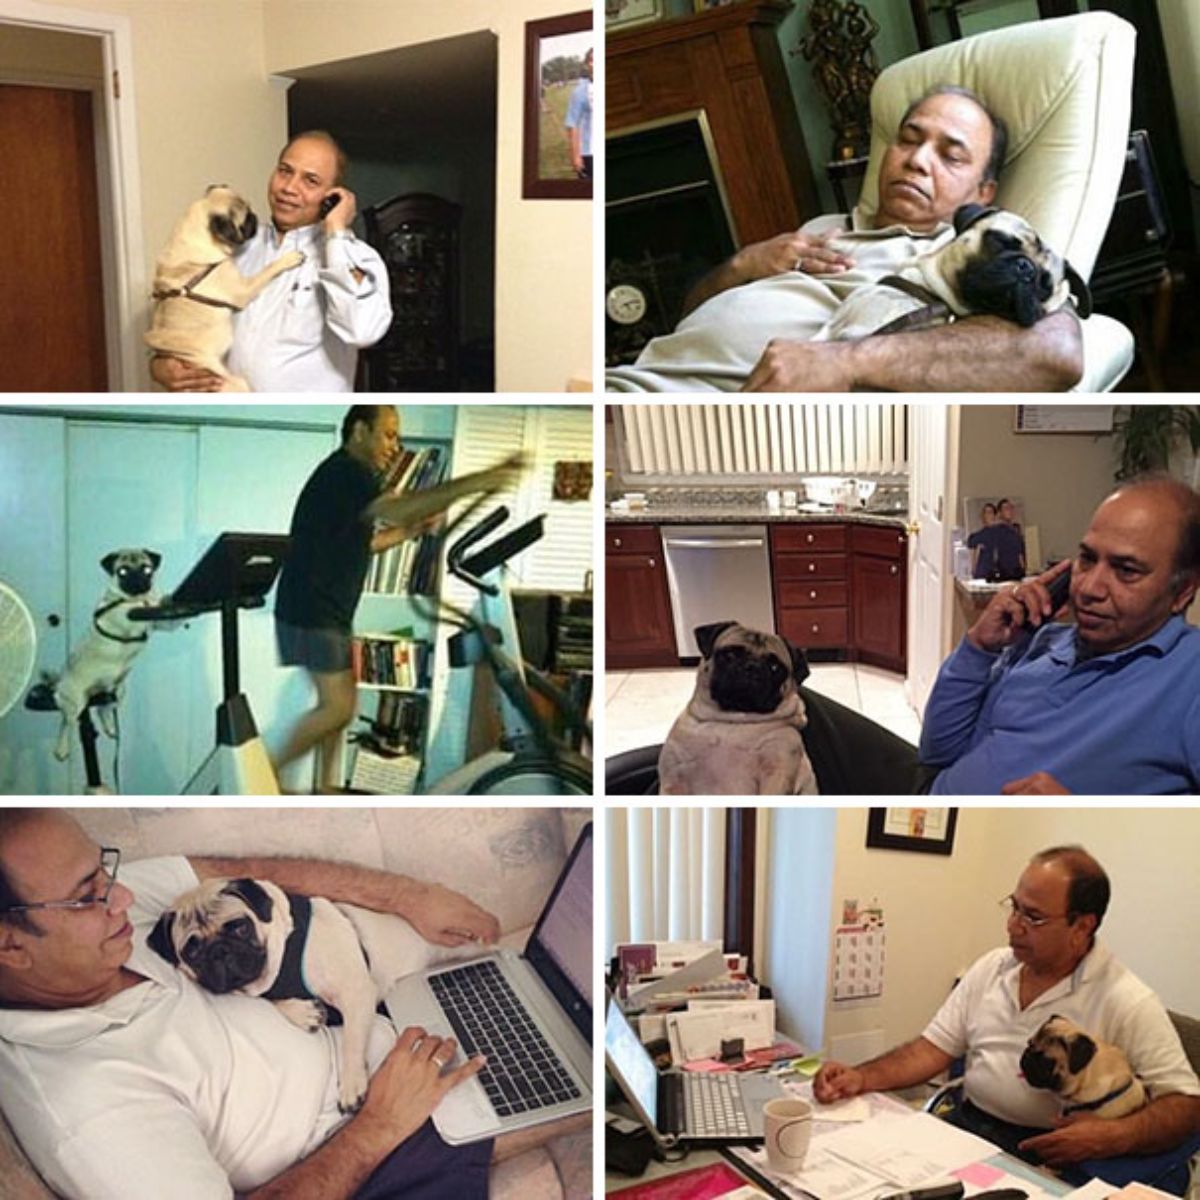 6 photos of a man with a brown pug